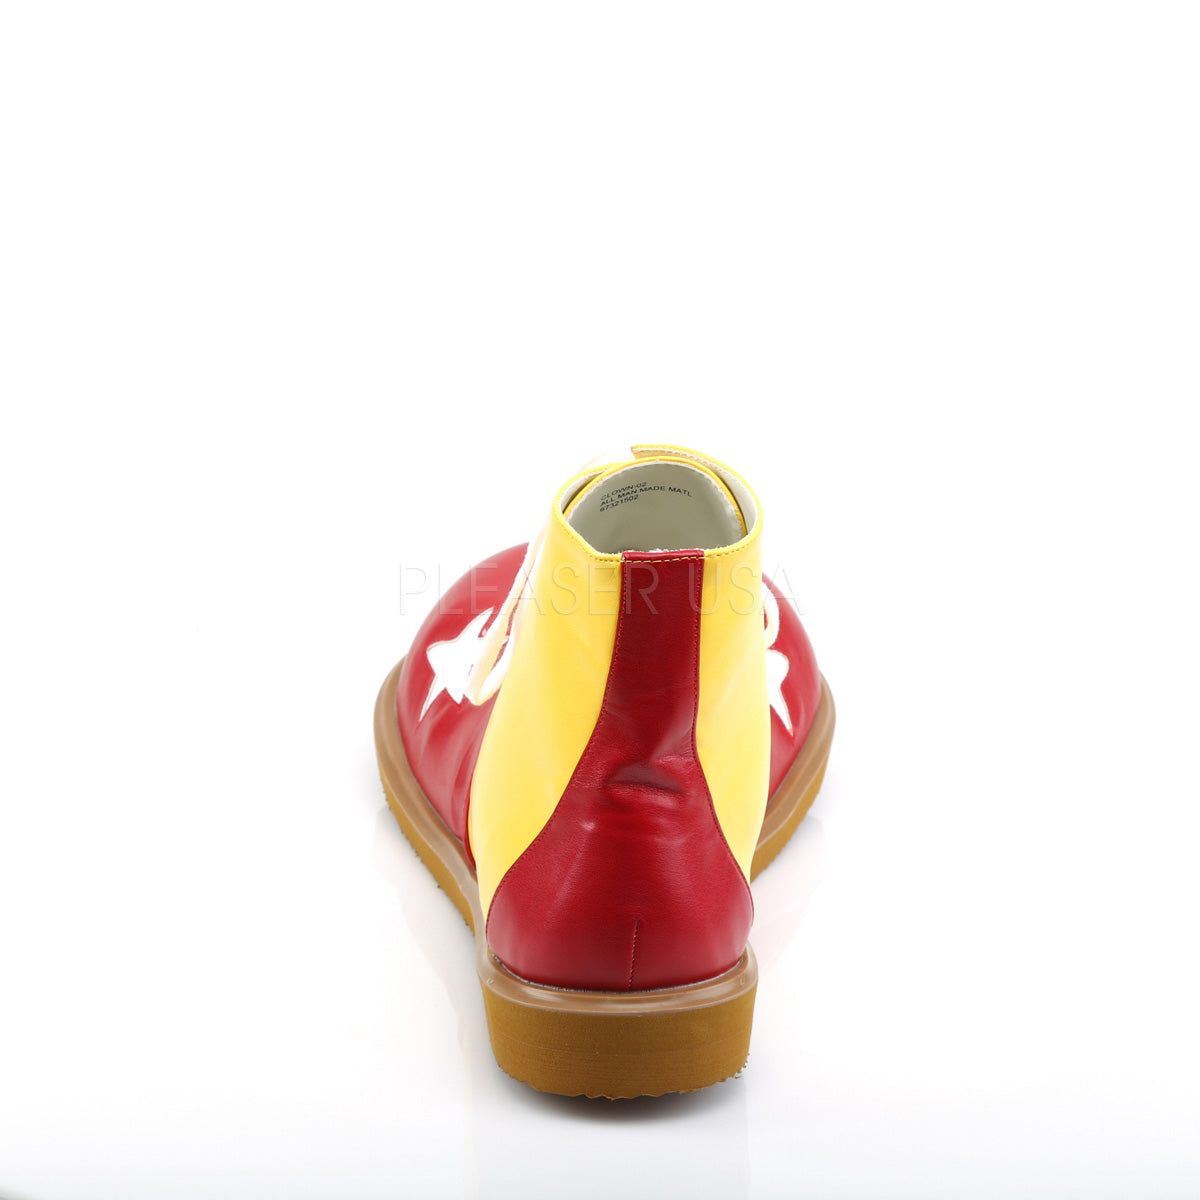 Yellow and Red Clown Shoes